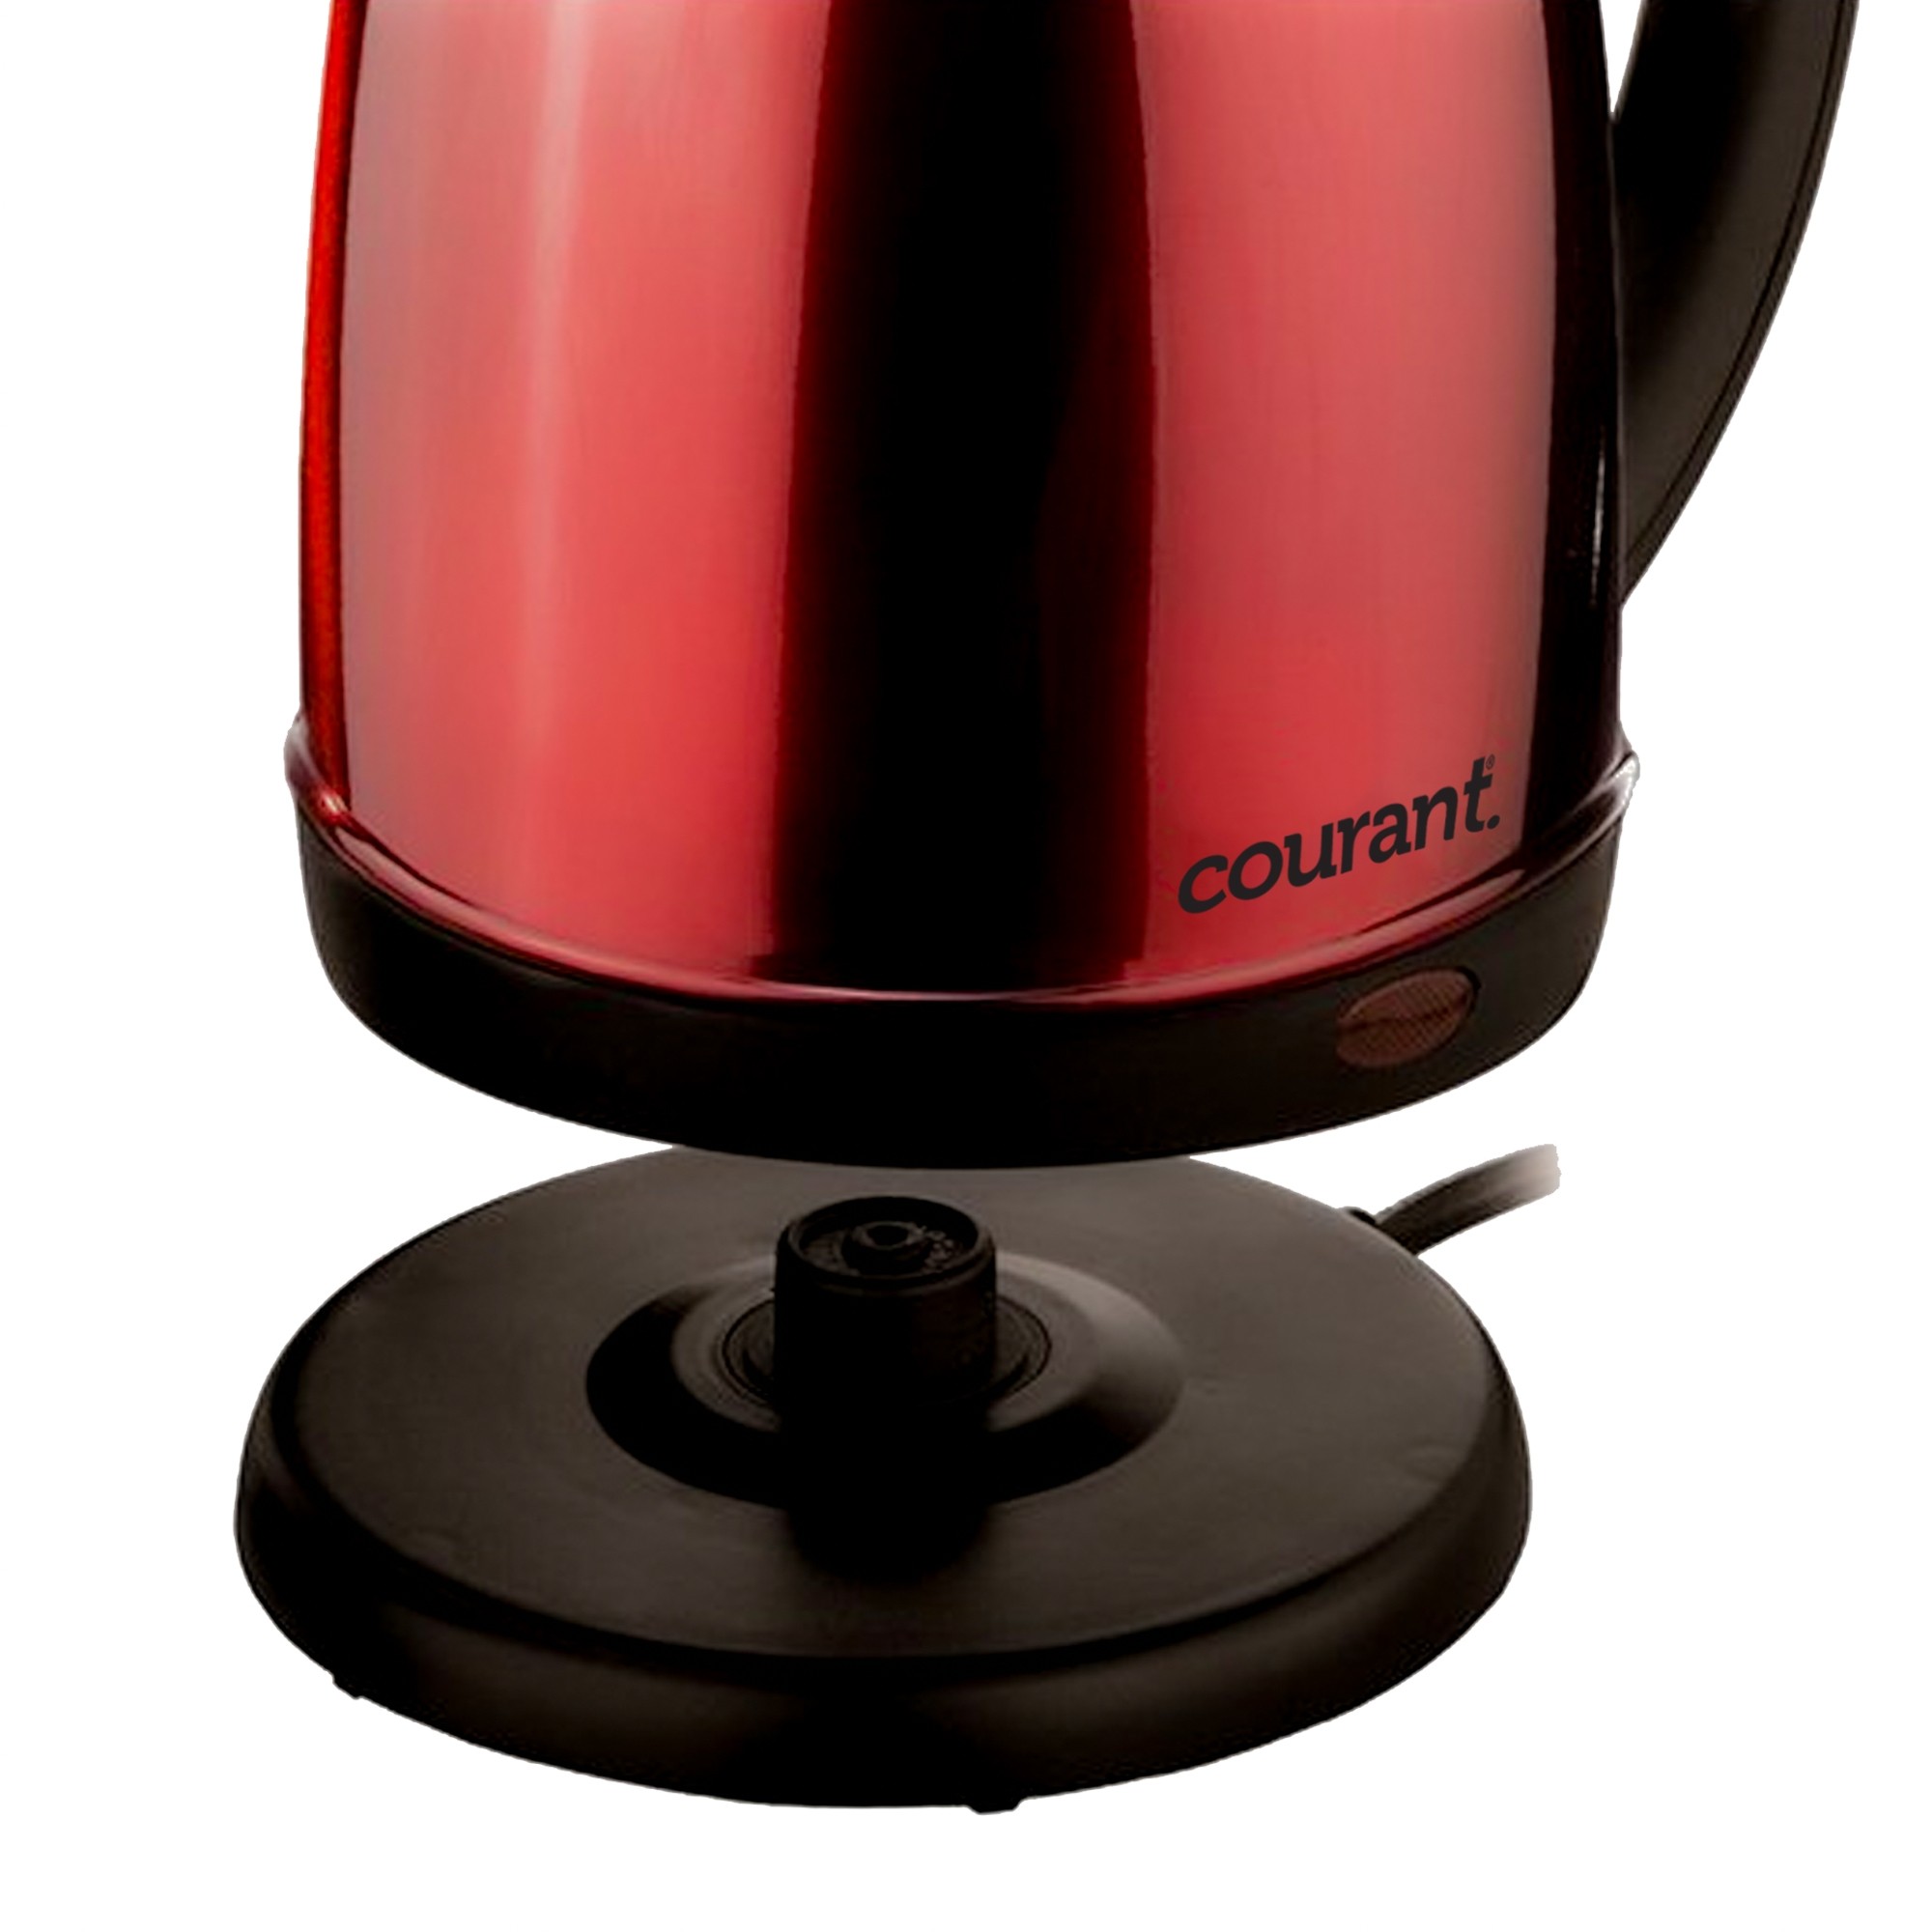 Red Electric Kettle, Modern Line